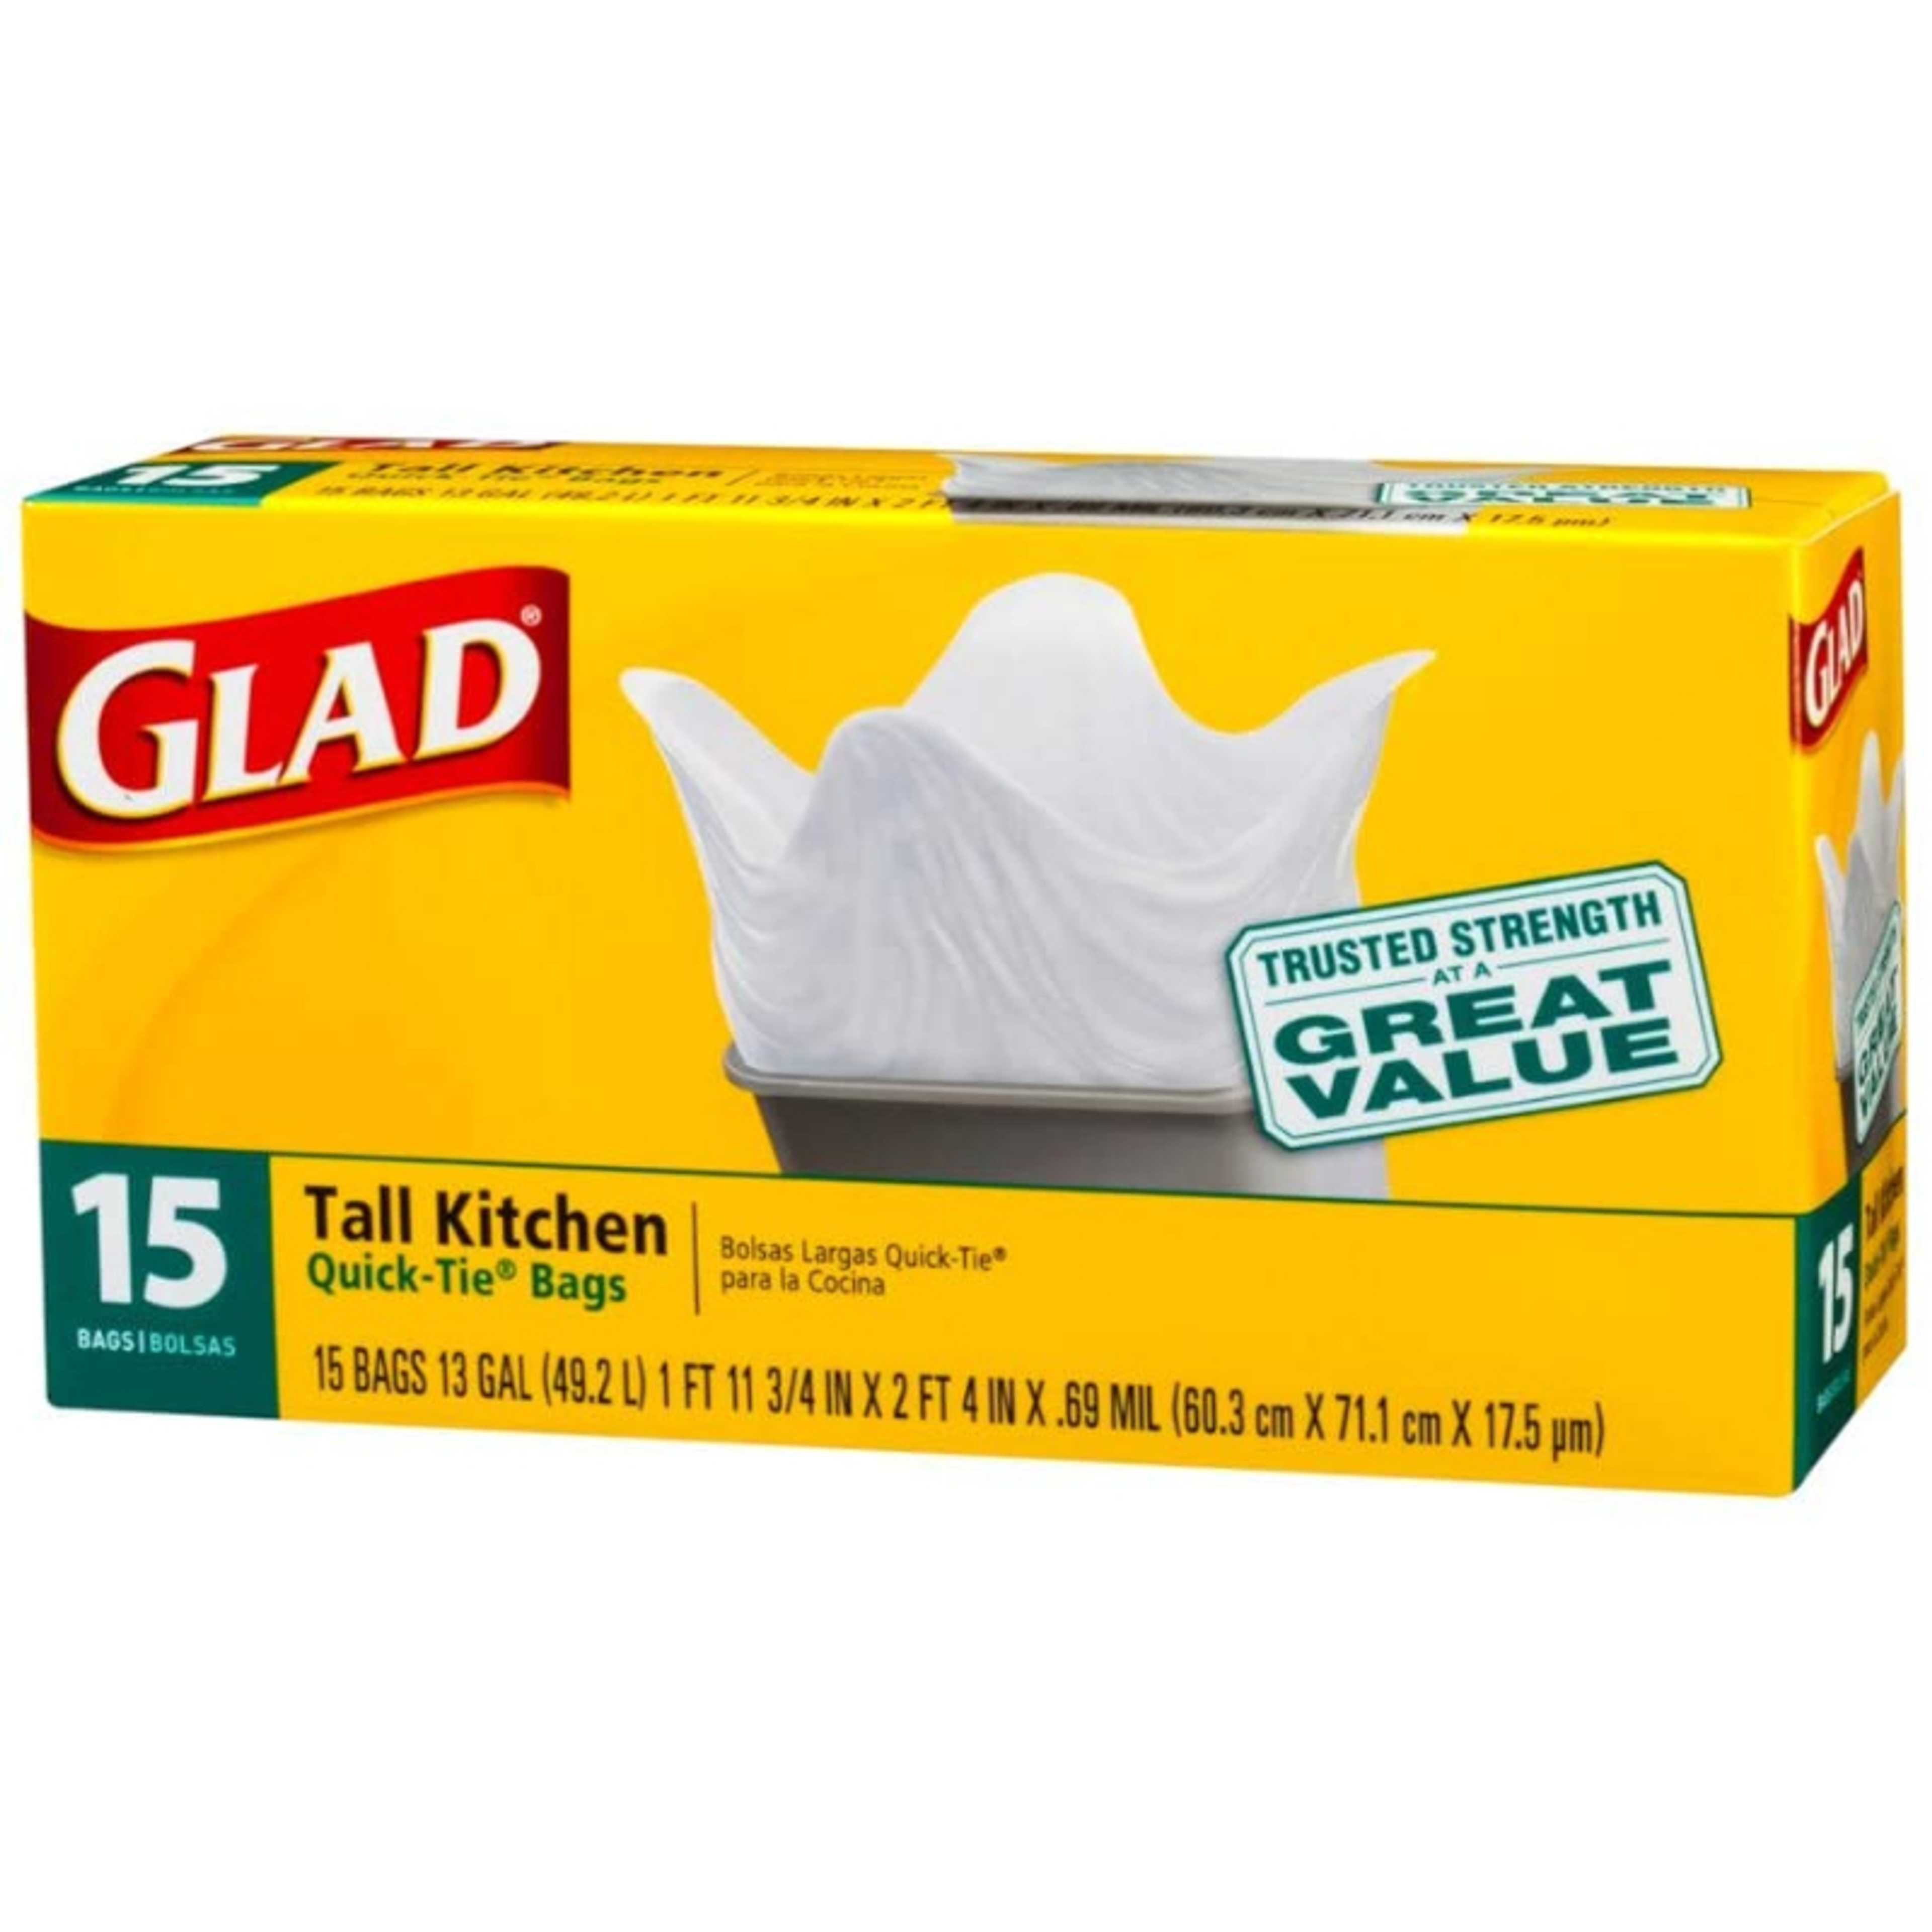 GLAD 13 GALLON QUICK TIE TALL KITCHEN BAGS 15�S (Imported)